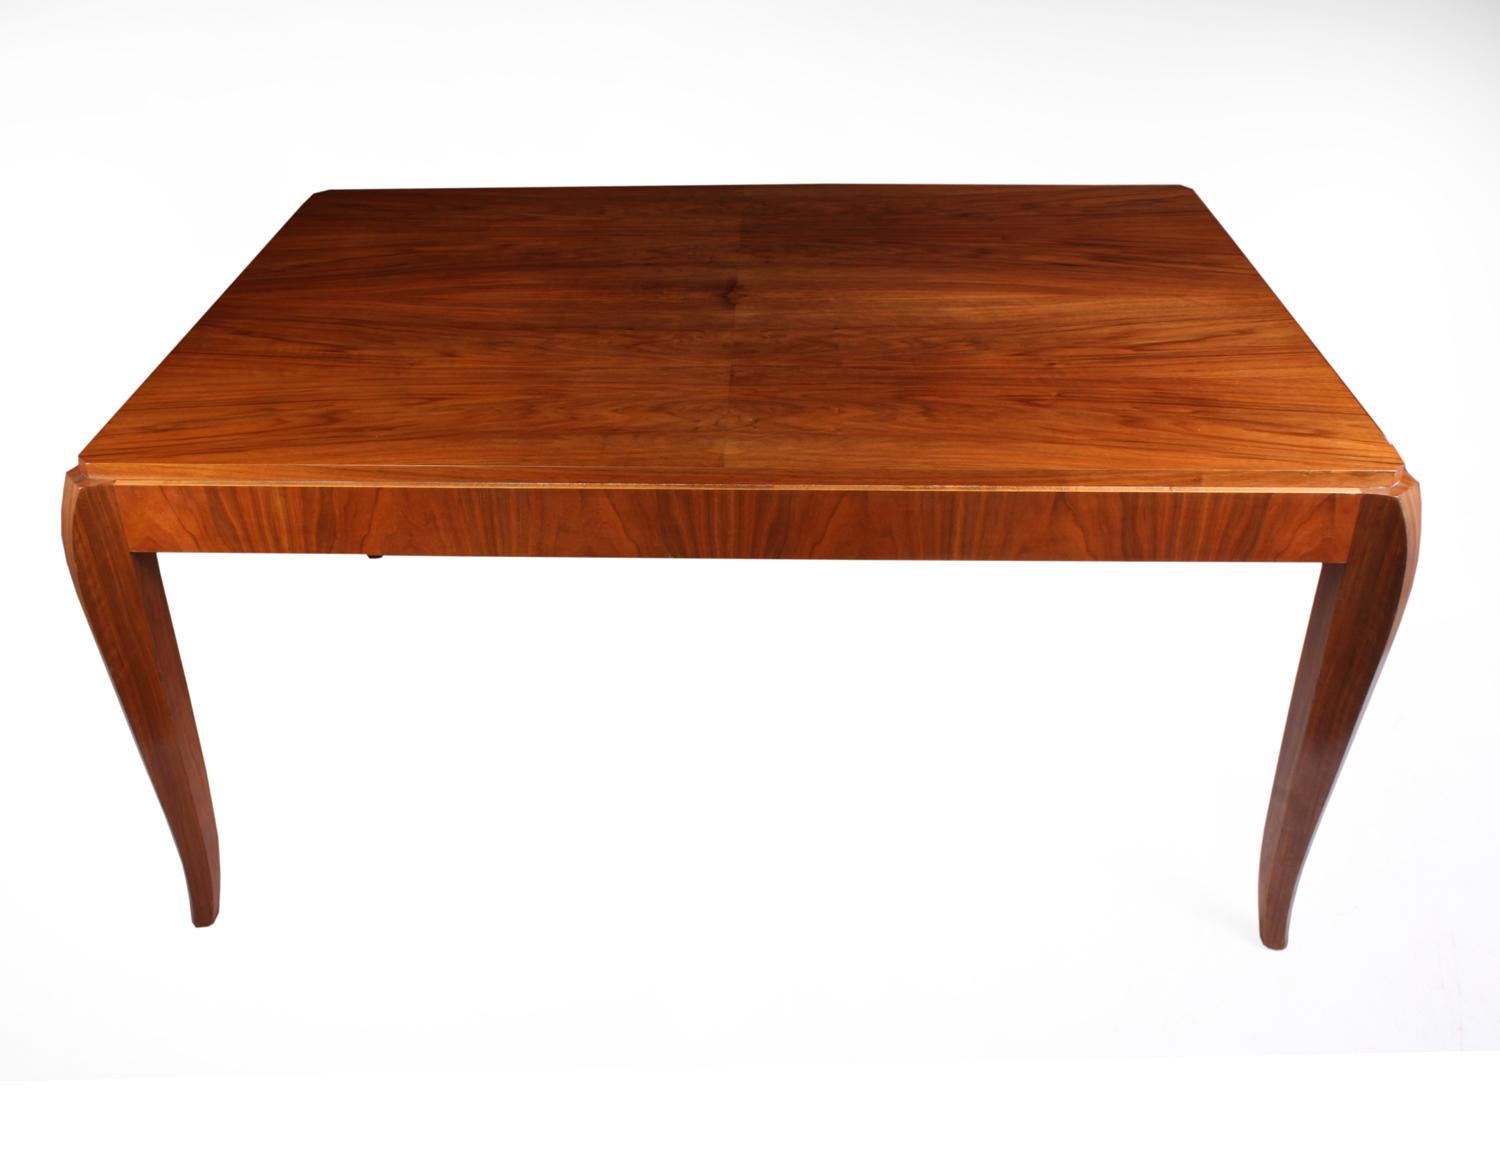 French Walnut Art Deco Dining Table (Art déco)